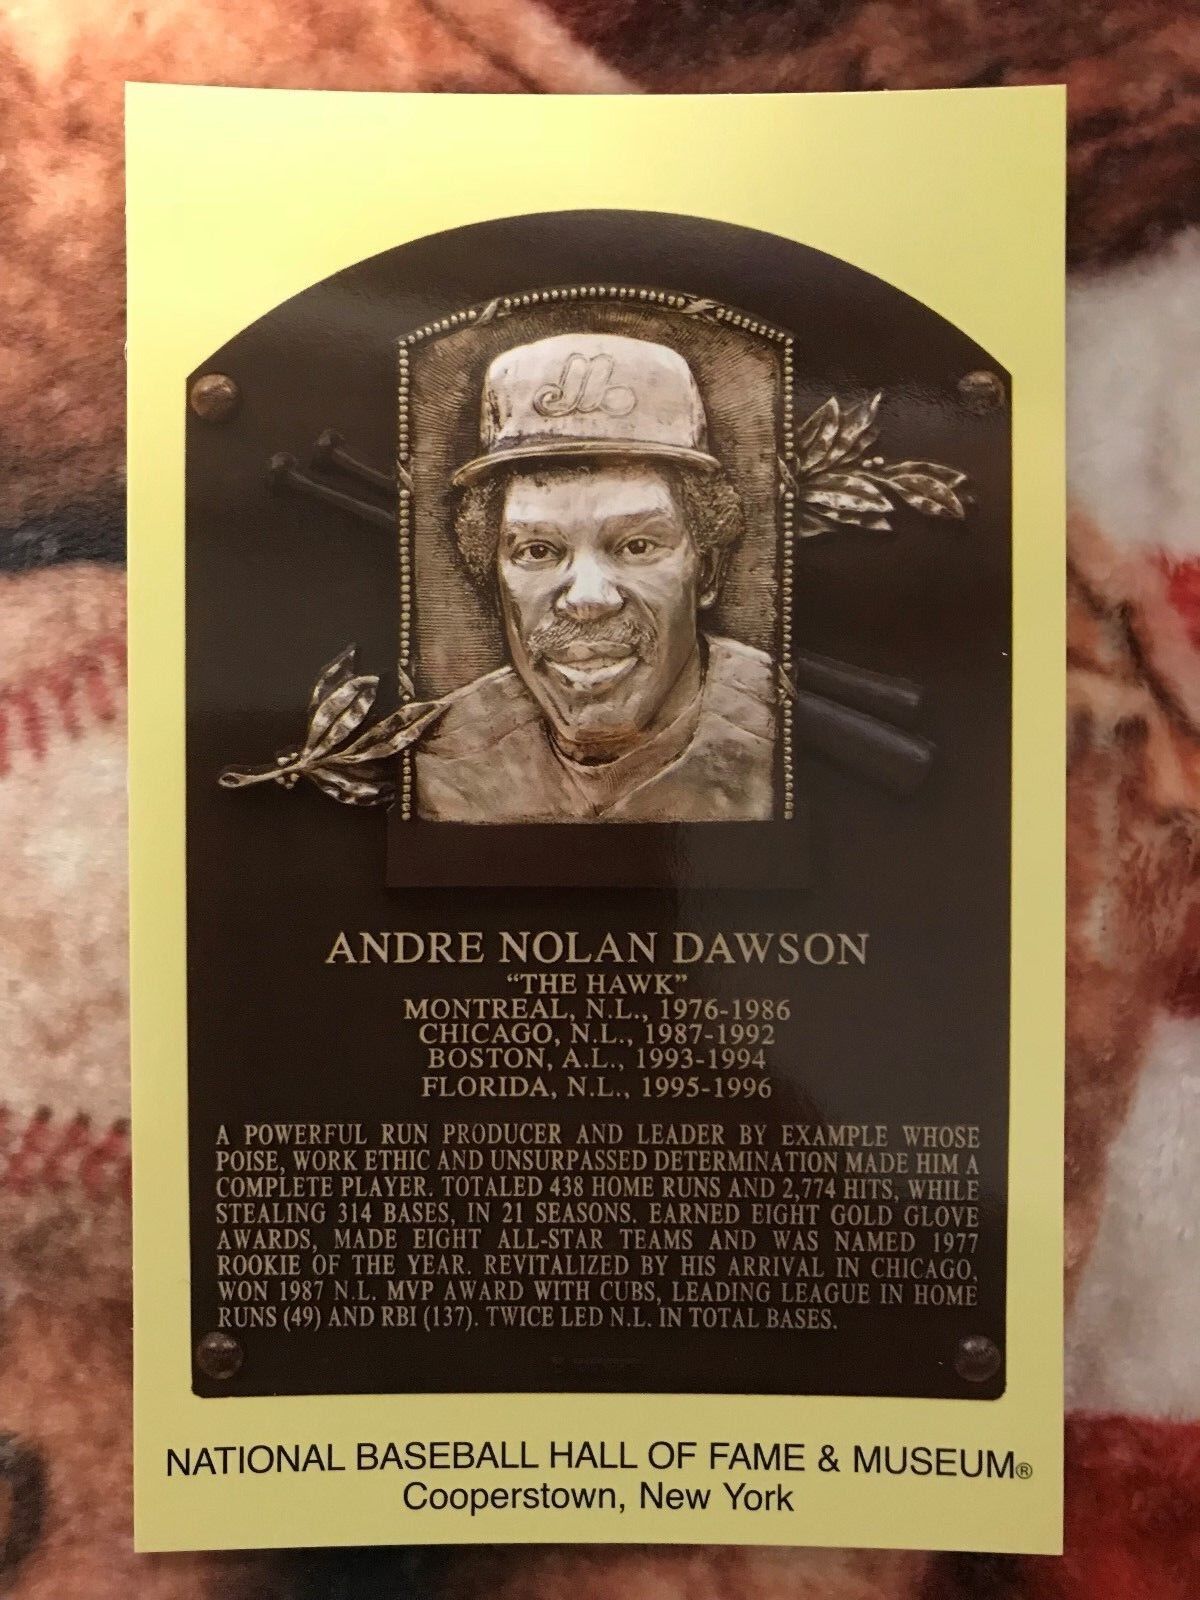 Andre Dawson Postcard - Baseball Hall of Fame Induction Plaque - Photo - Expos